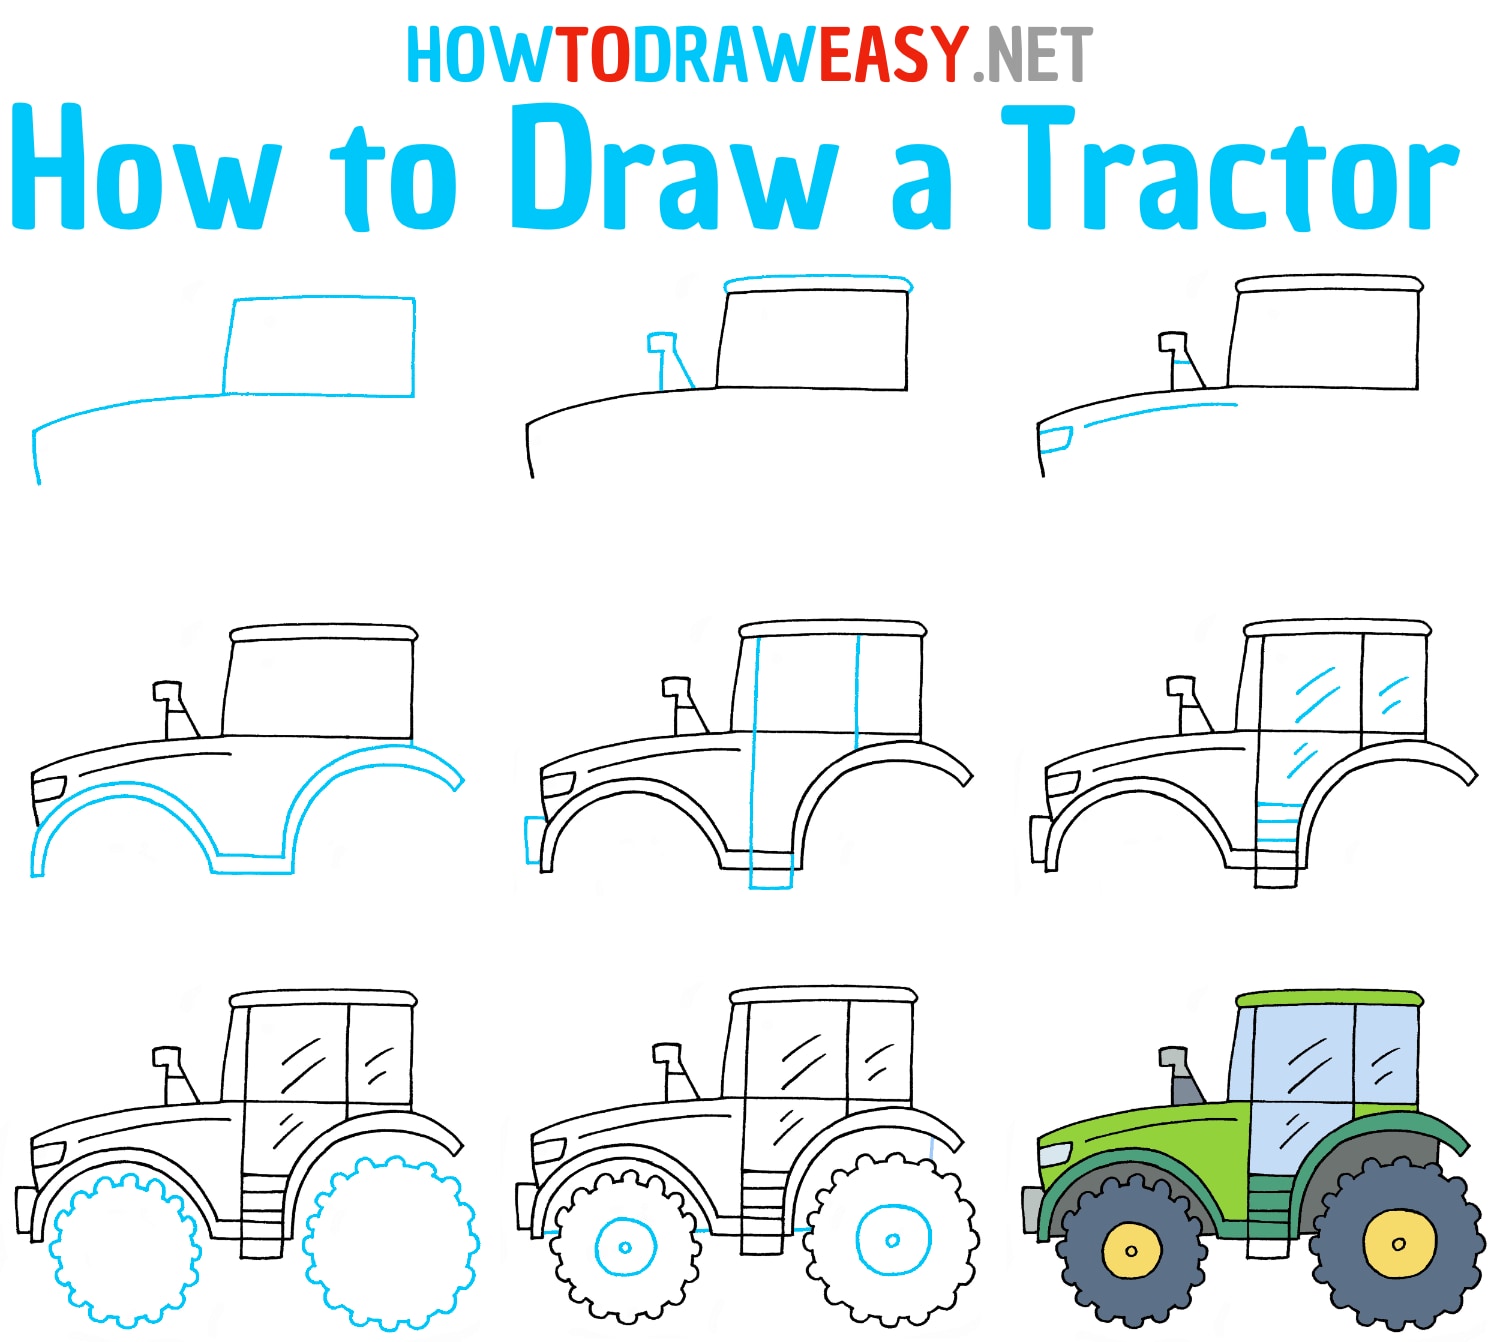 How to Draw a Tractor Step by Step Tutorial